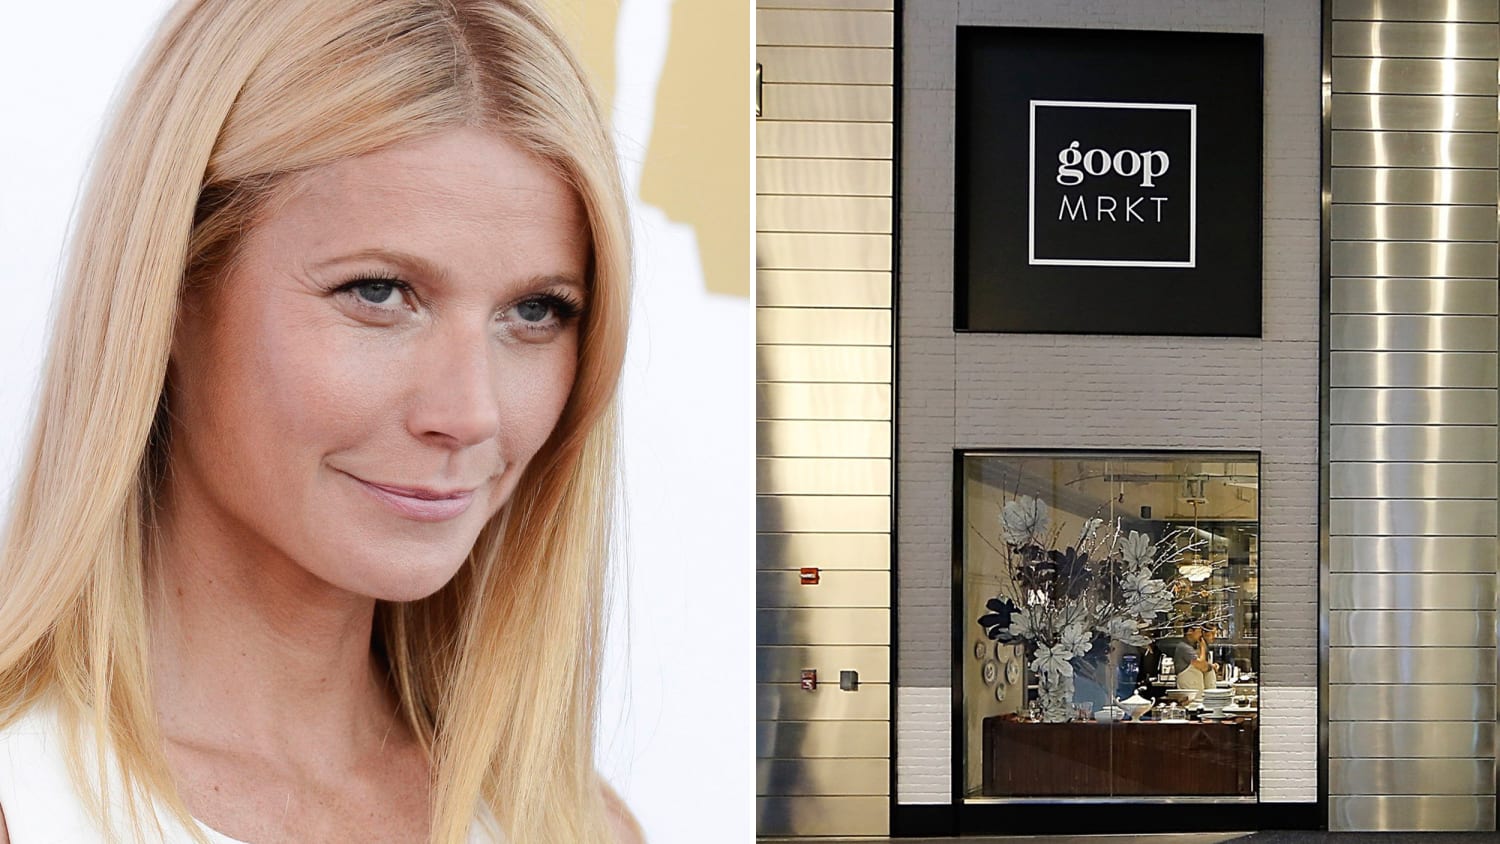 Gwyneth Paltrow's Goop pop-up shop robbed in NYC: Here are the details - TODAY.com